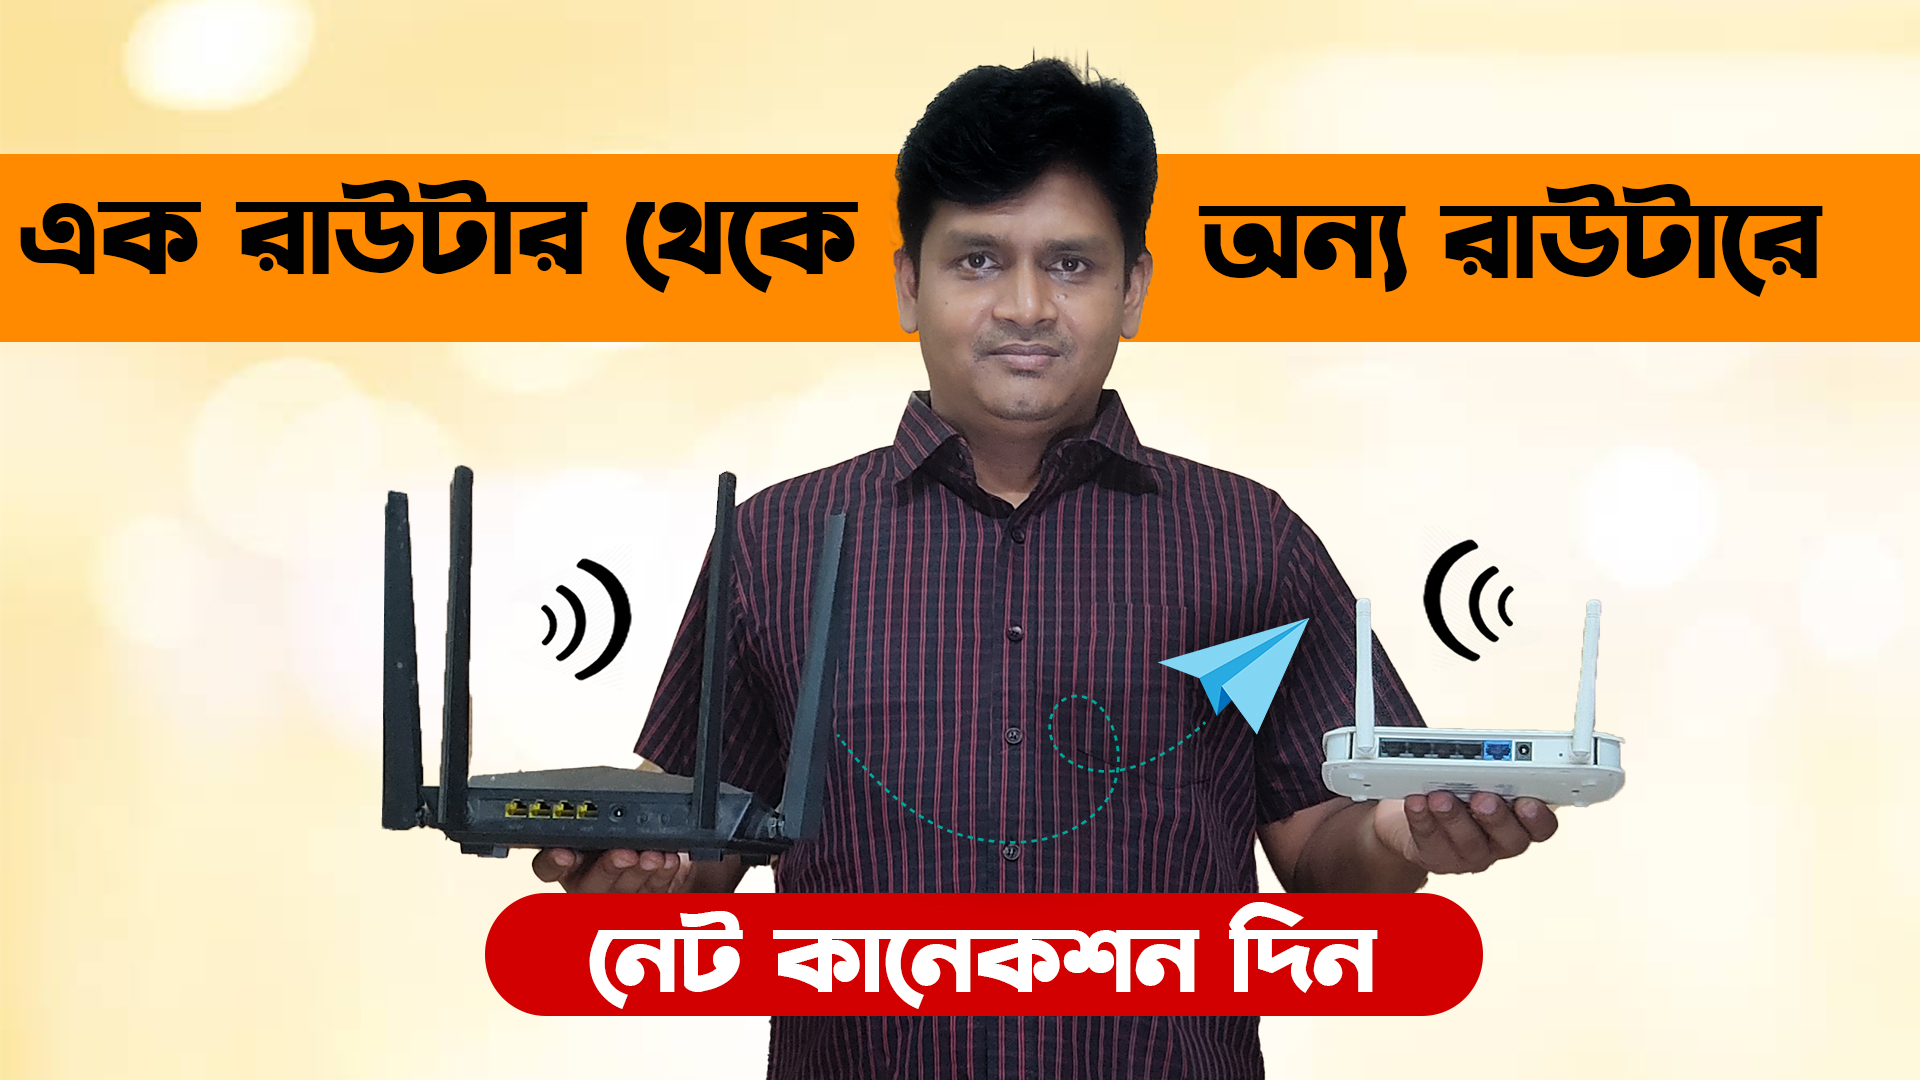 How To Connect Two Router Using LAN Cable - Router to Router connection with LAN cable